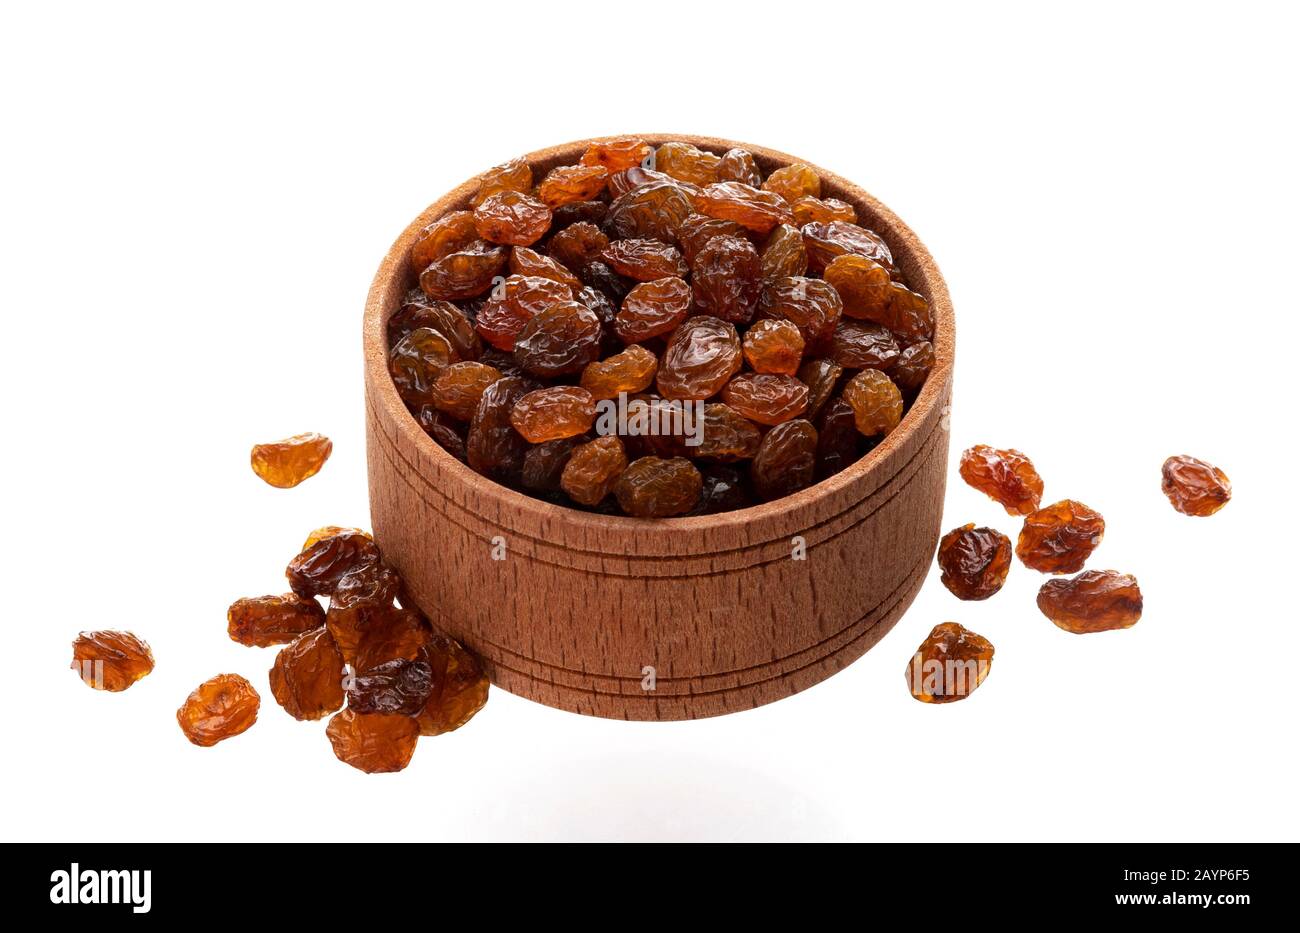 Raisins in wooden bowl isolated on white background Stock Photo